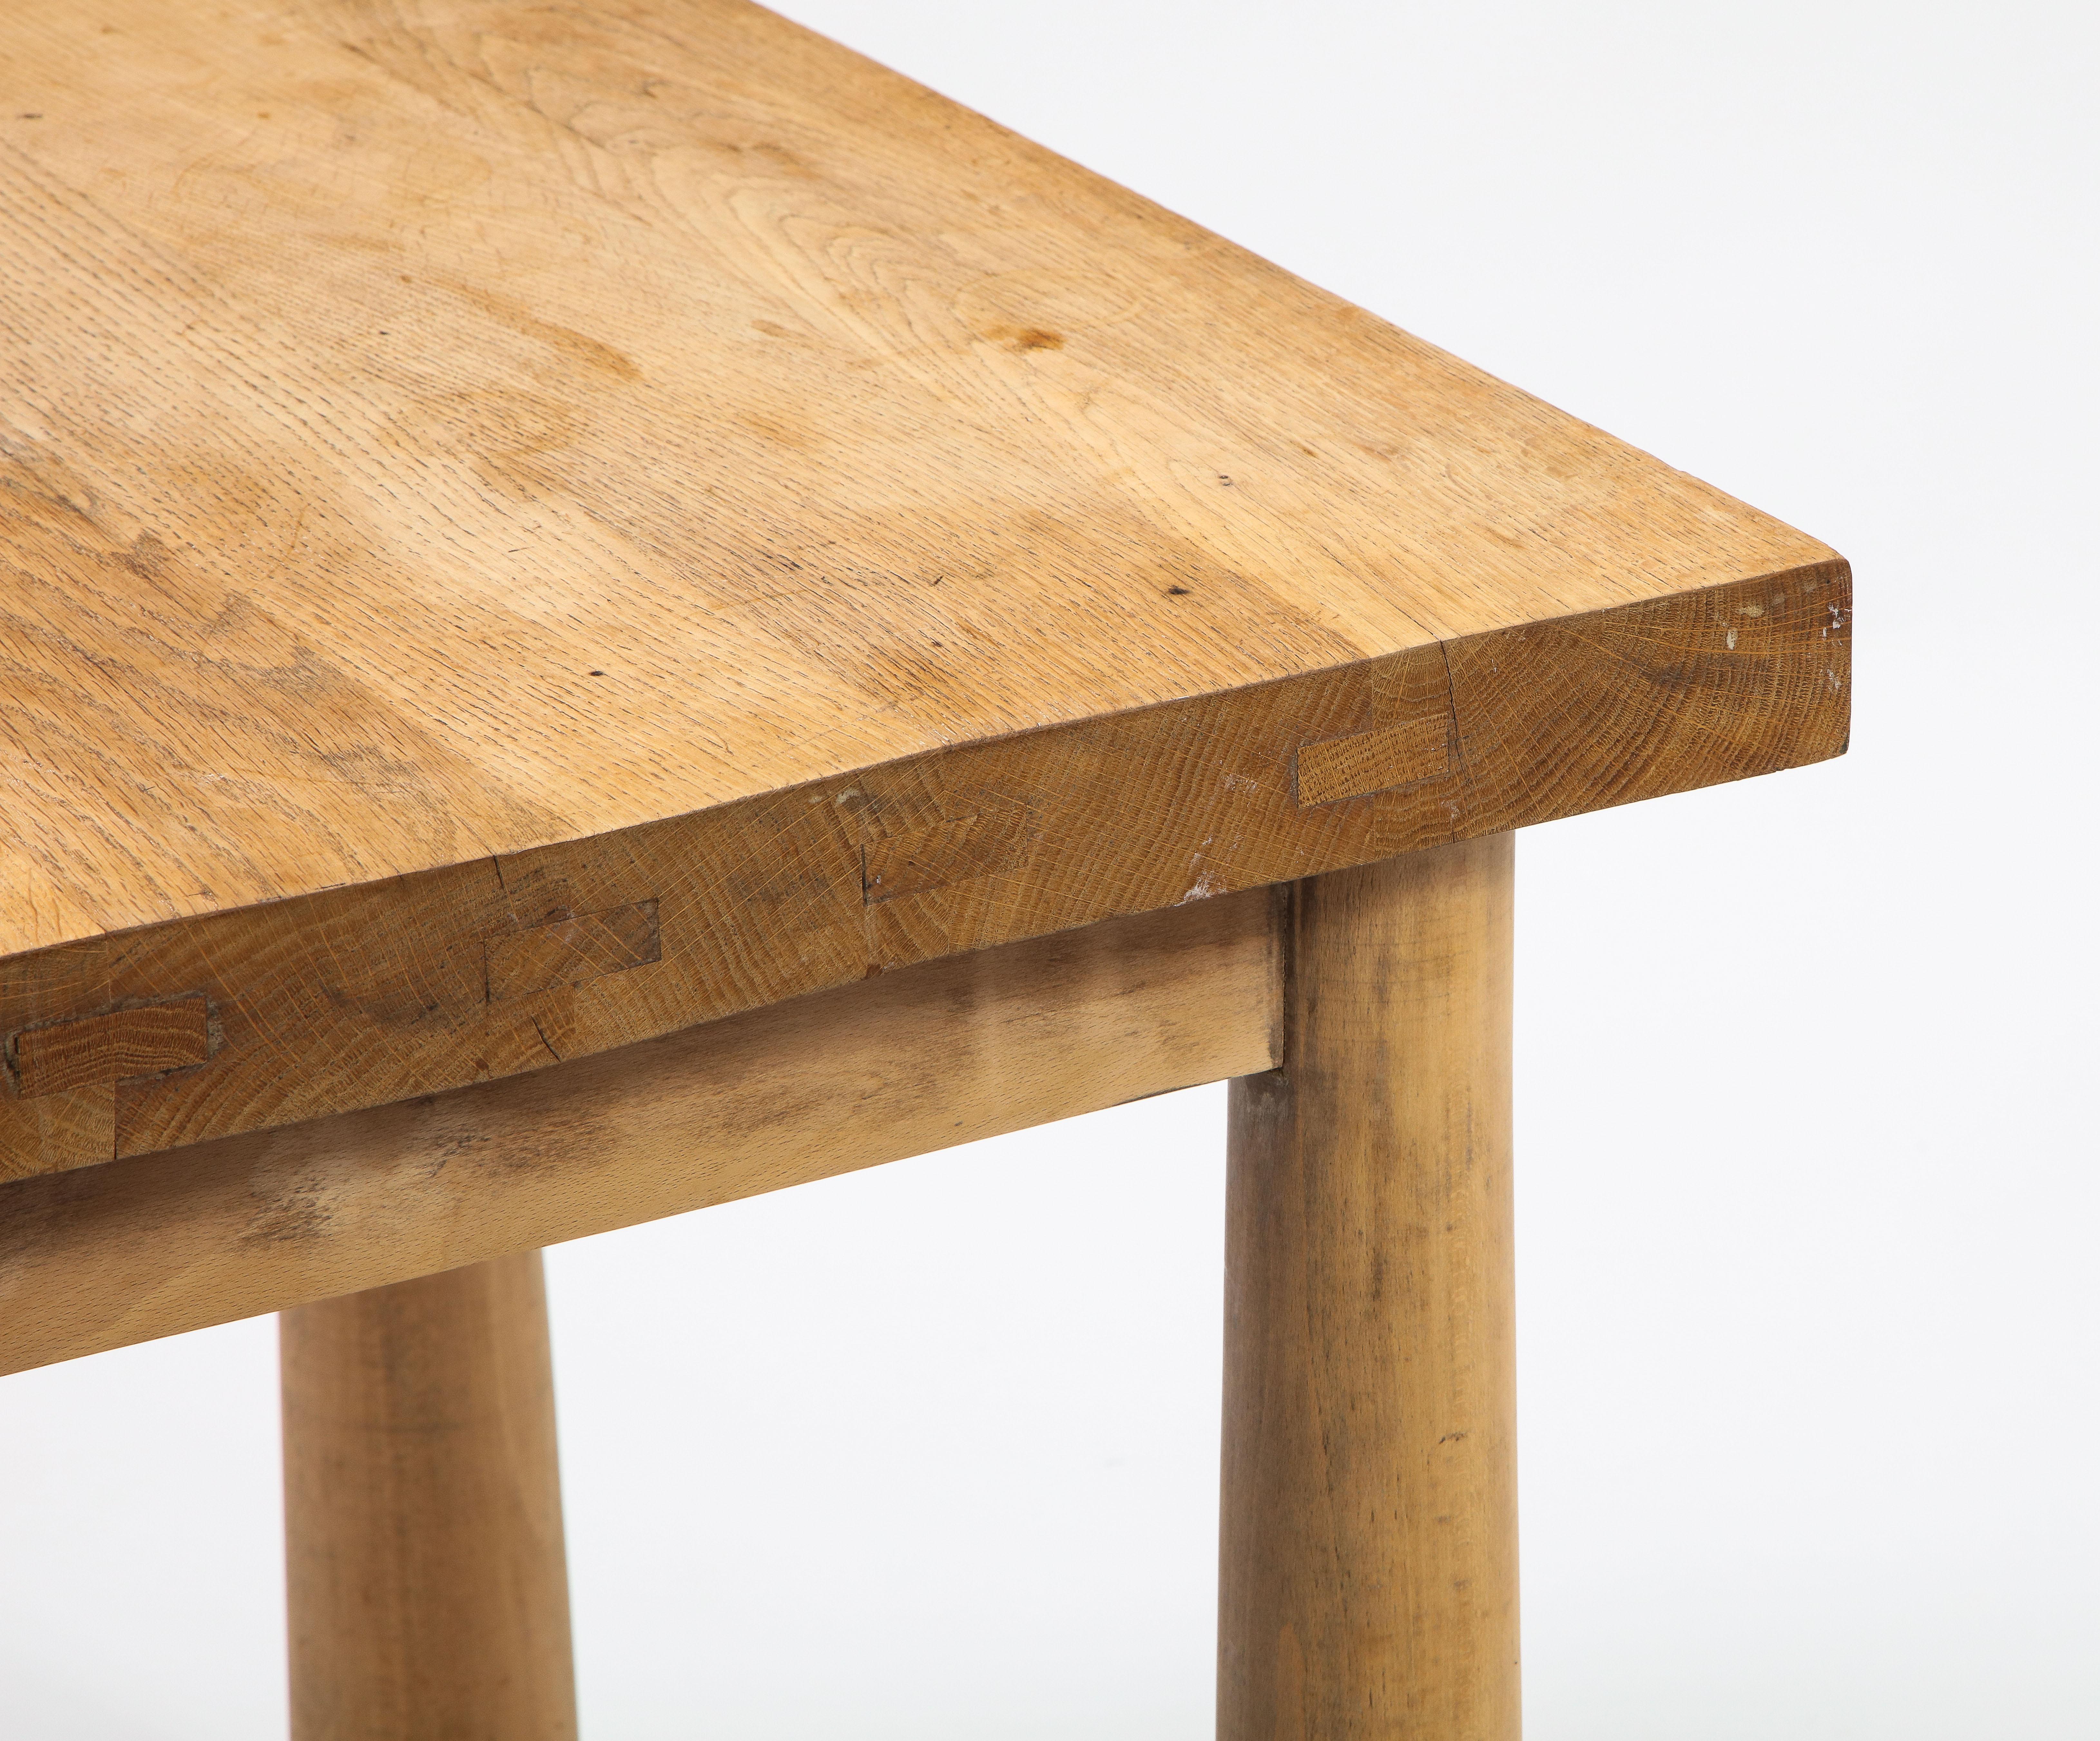 Midcentury square French table in oak, in the manner of Charlotte Perriand. The legs possess a slightly conical form and extend outwards toward the bottom. Wonderful patina.